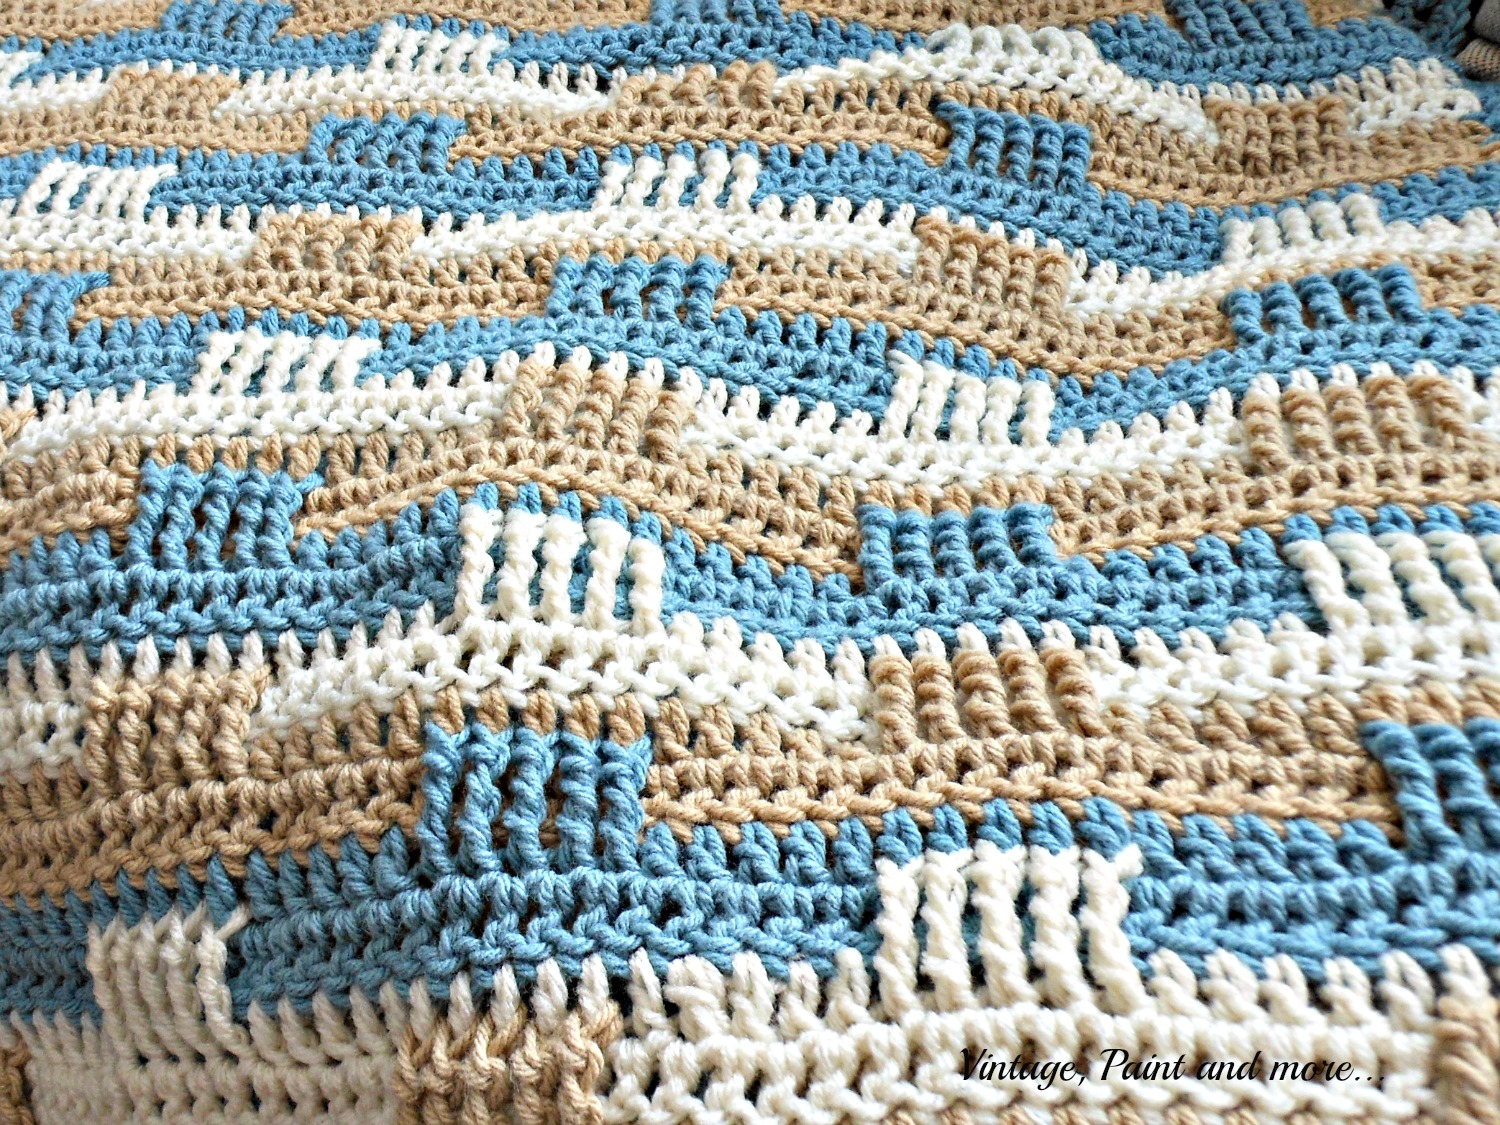 Easy Basket Weave Crochet Pattern Crochet Afghan And Stenciled Pillow Vintage Paint And More